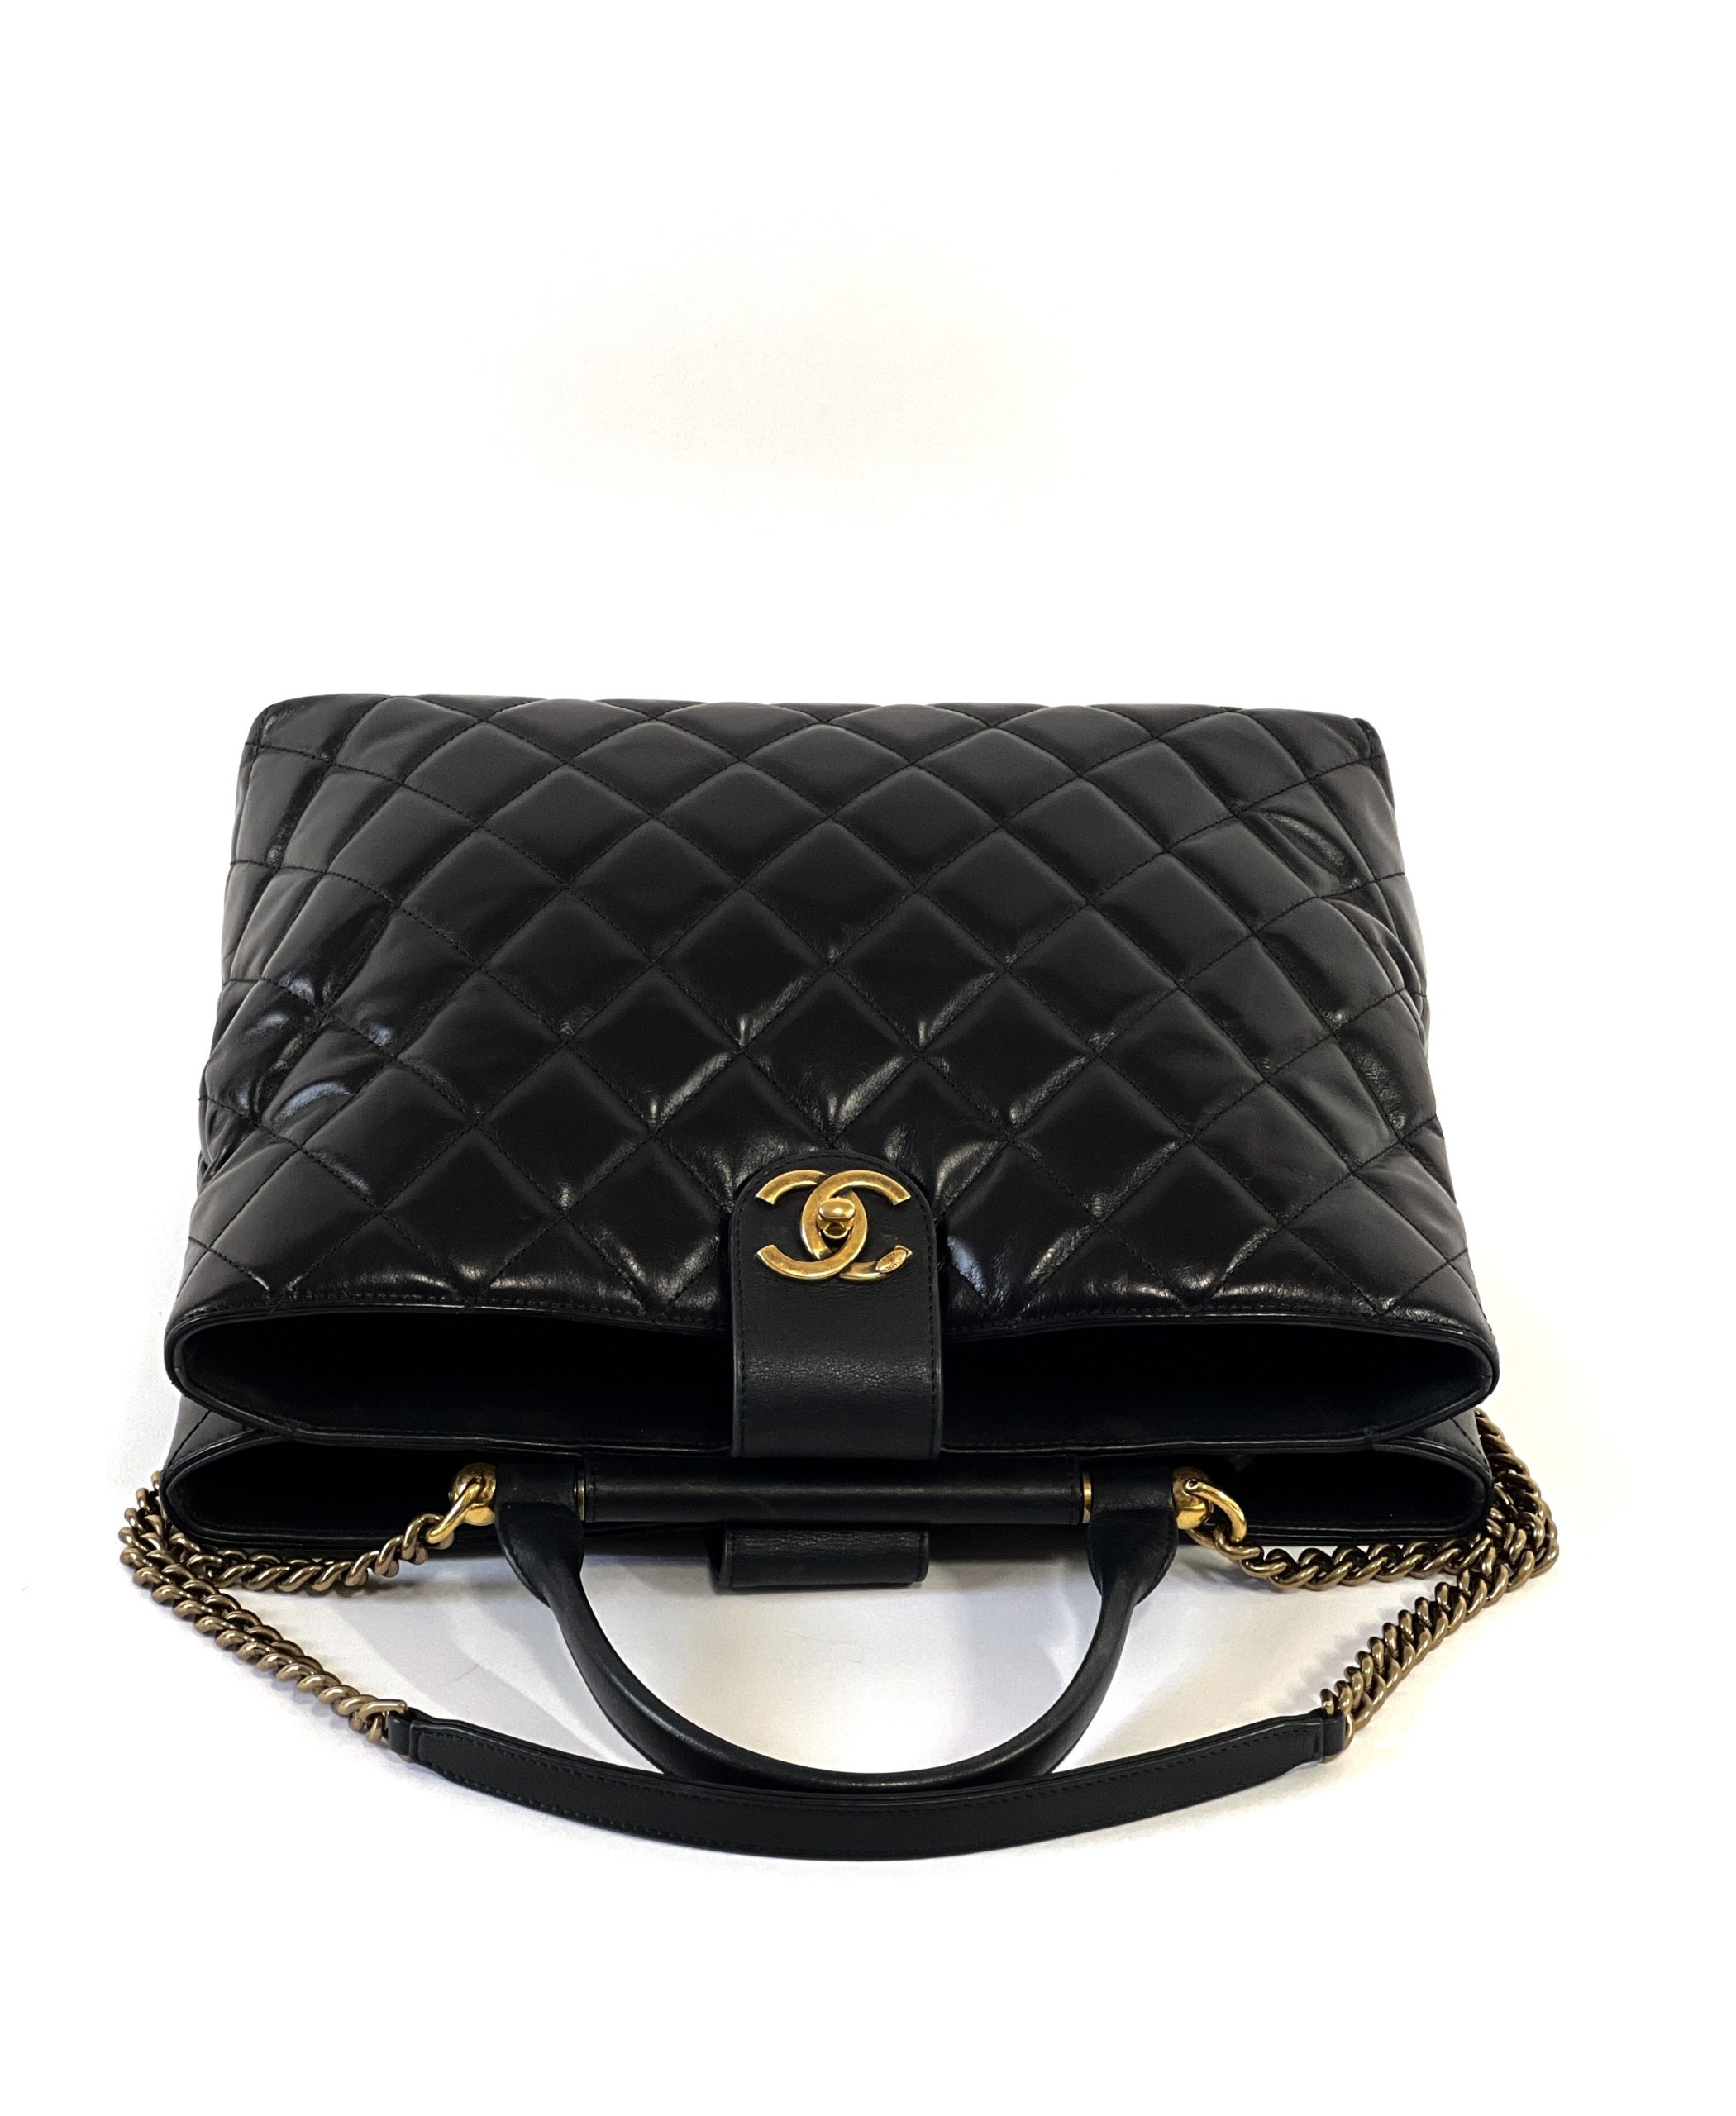 Chanel Large Tote A66941 B08433 NI063 , Gold, One Size